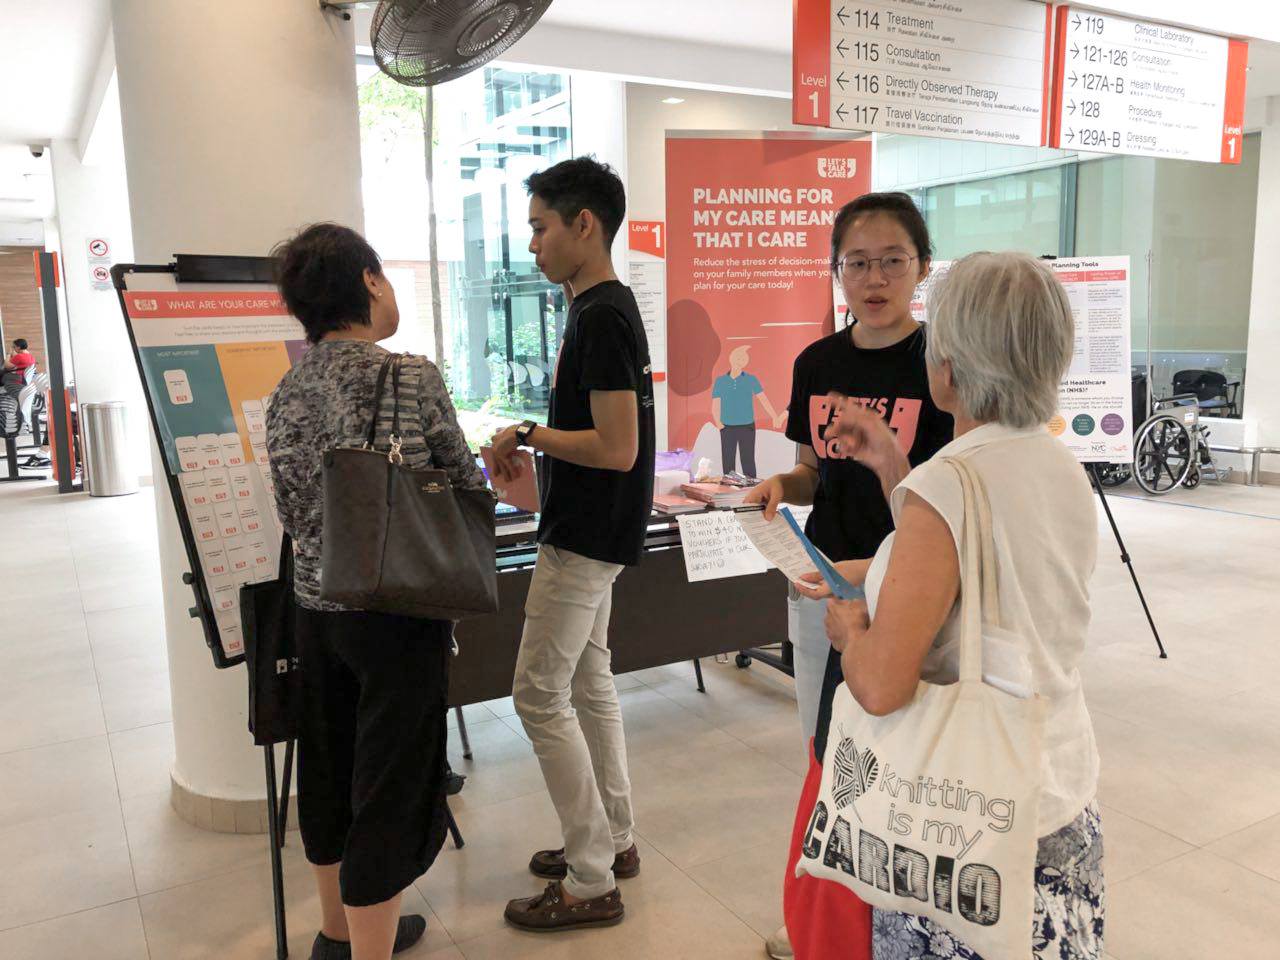 The students speaking to elderly individuals at polyclinics in Singapore (Photo: Let's Talk Care / Facebook)